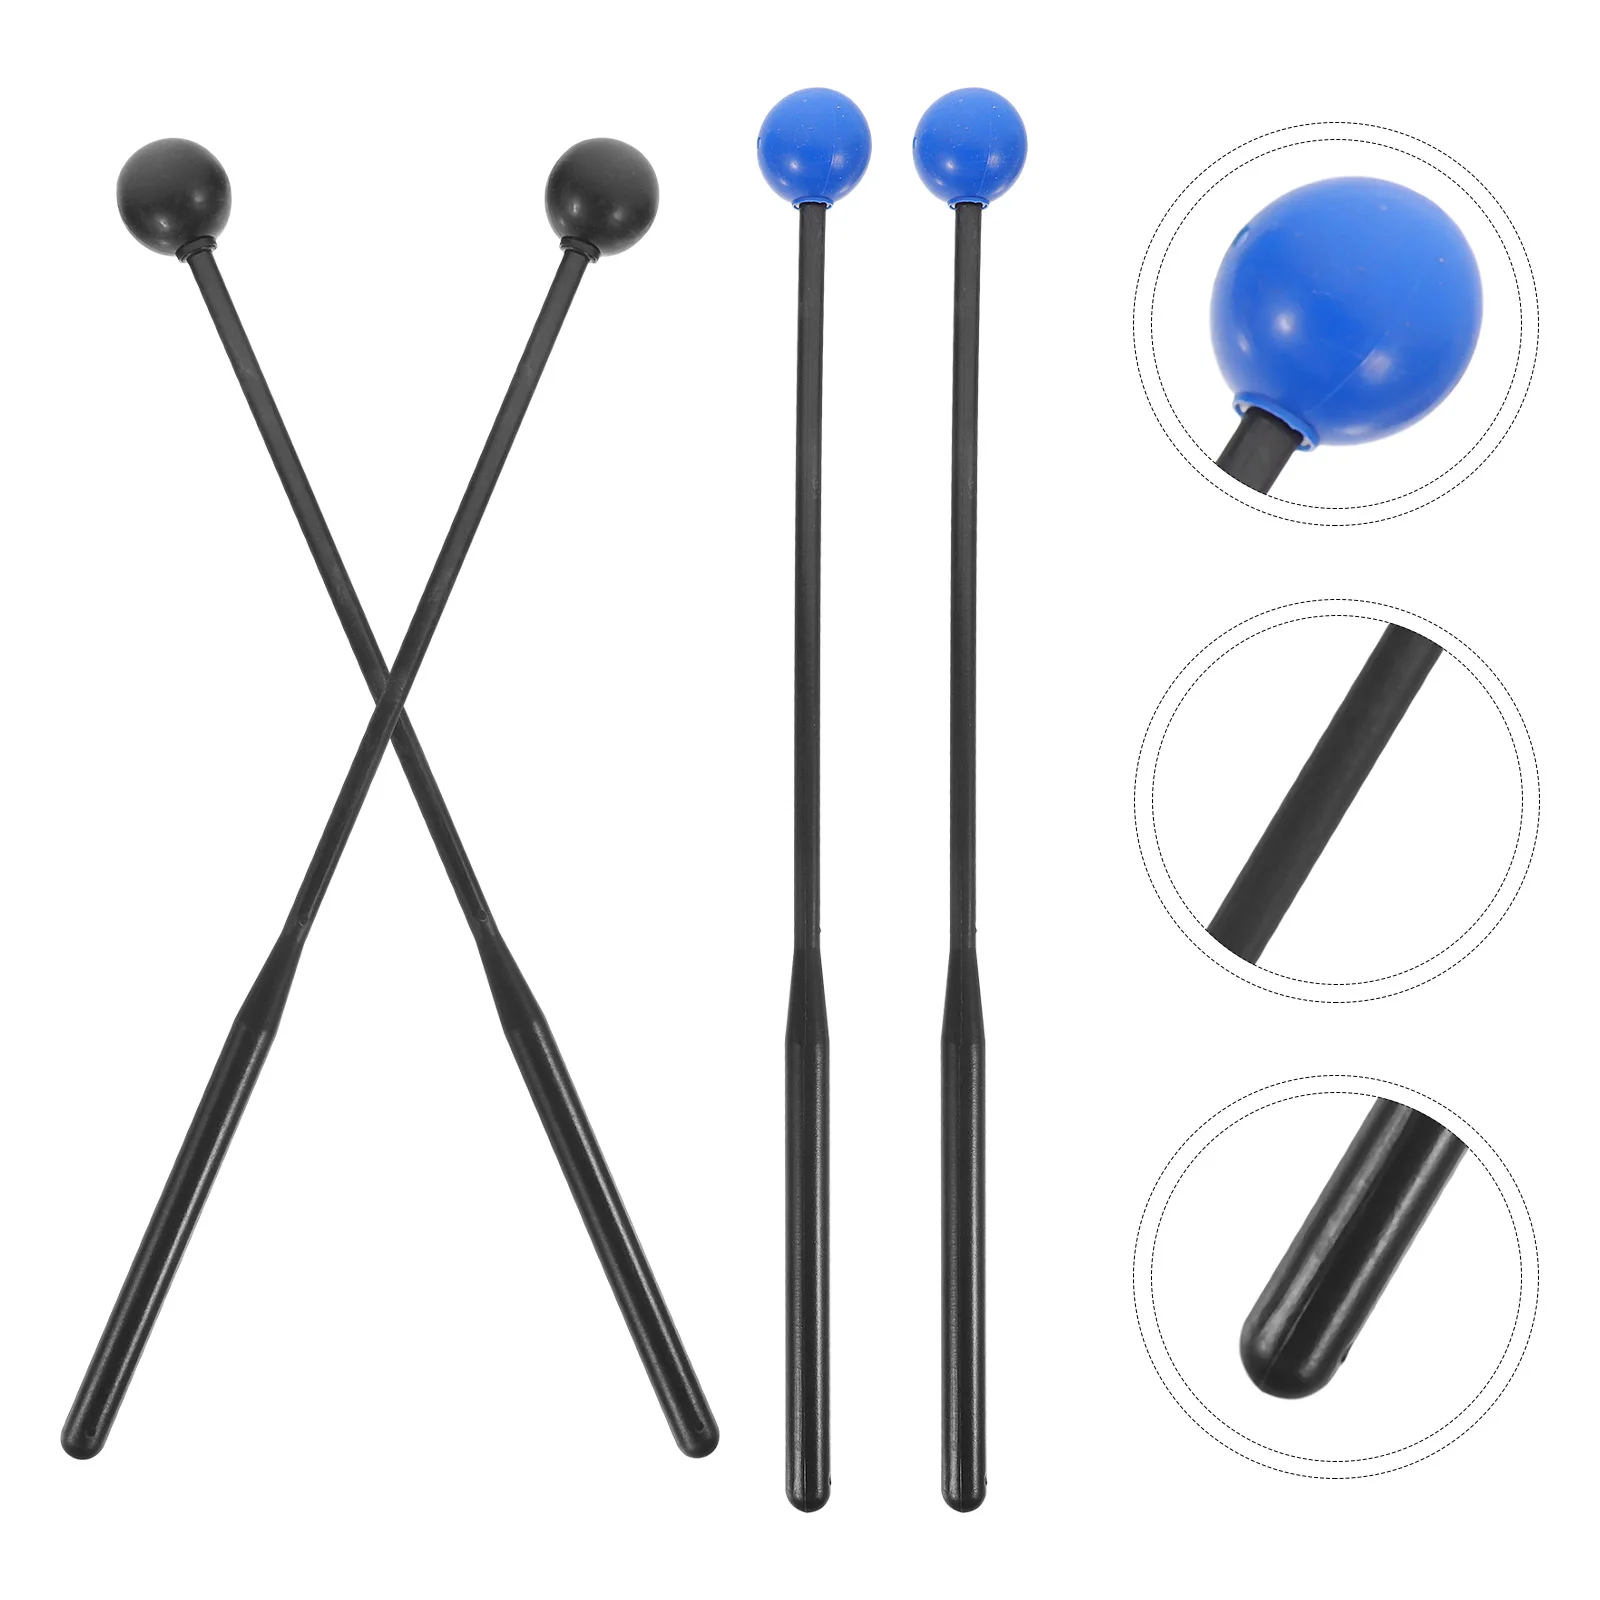 Tongue Drum Drumstick Percussion Instrument Mallets Marimba Drumsticks Practice Mallets for Beginners tongue drum drumstick percussion instrument mallets marimba drumsticks practice mallets for beginners